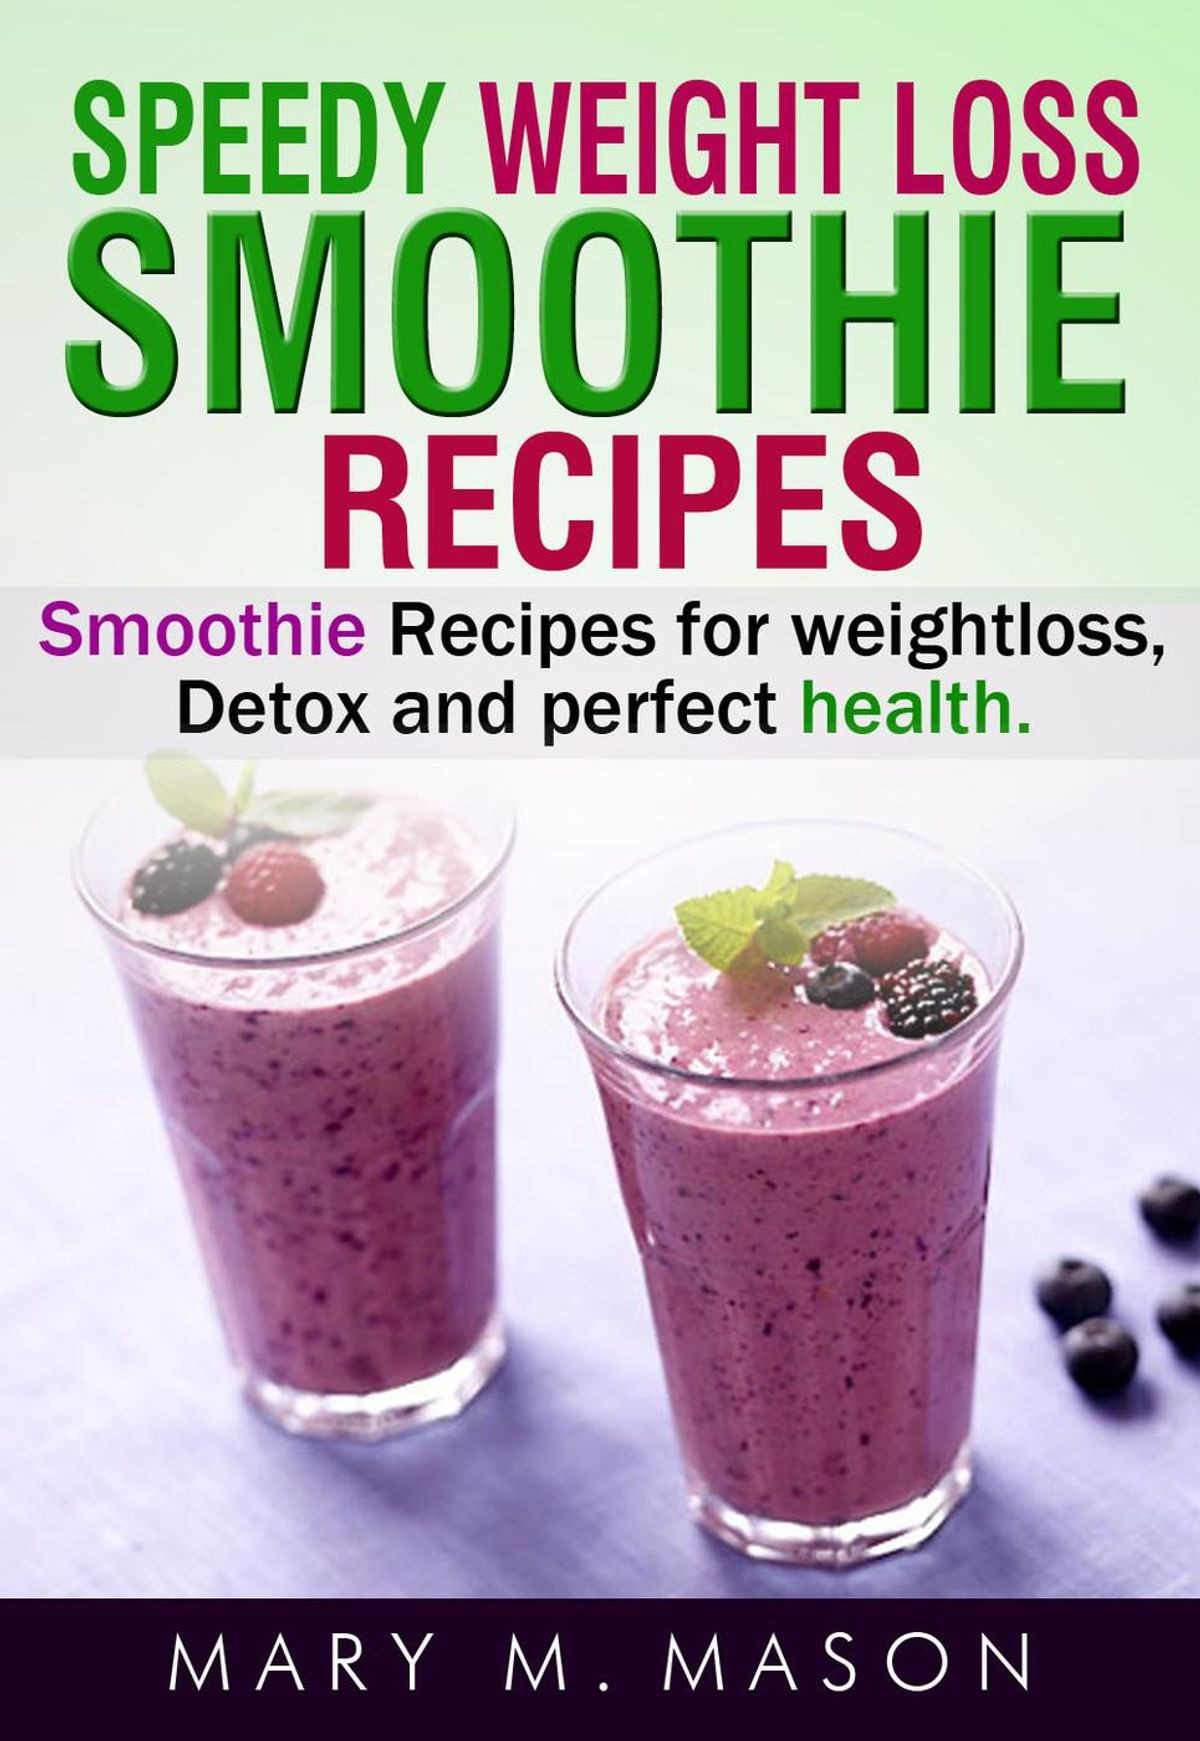 Smoothie Recipes Weight Loss
 Speedy Weight Loss Smoothie Recipes Smoothie Recipes for